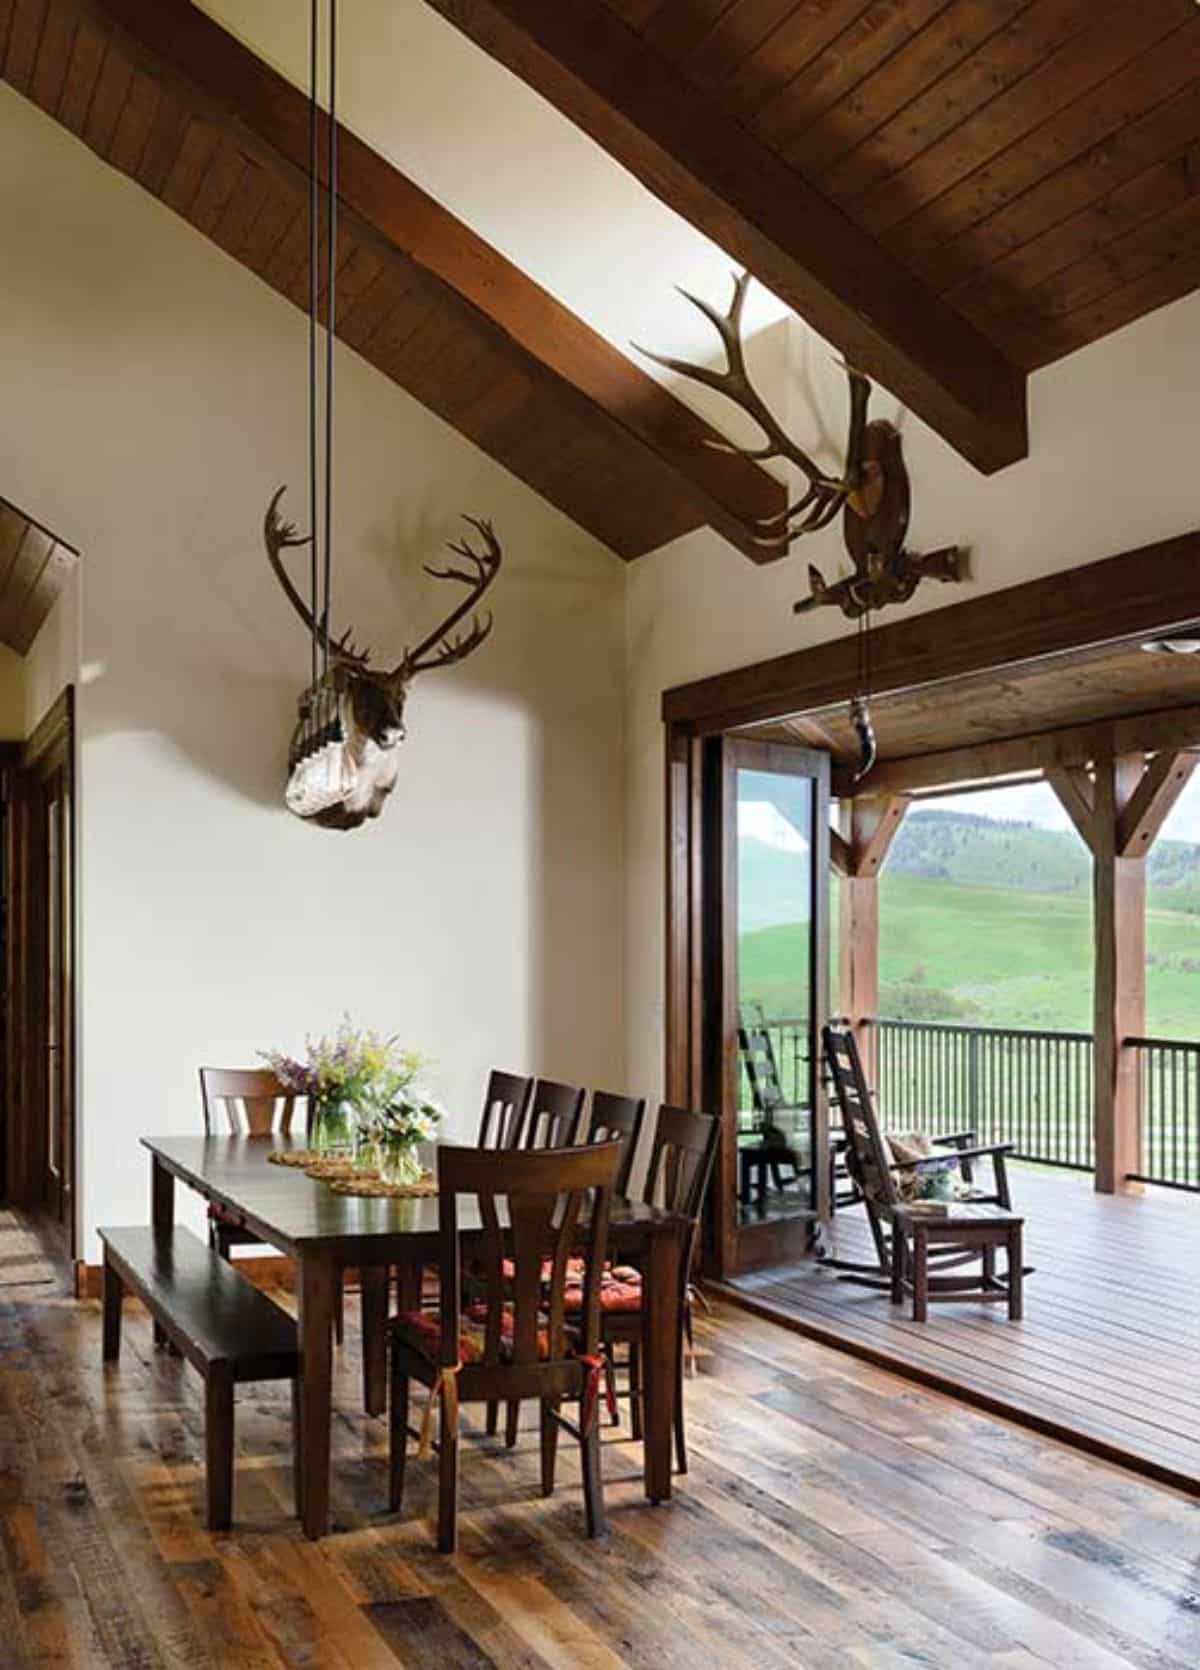 dining table underneath skylight with deer antlers and head agaisnt wall